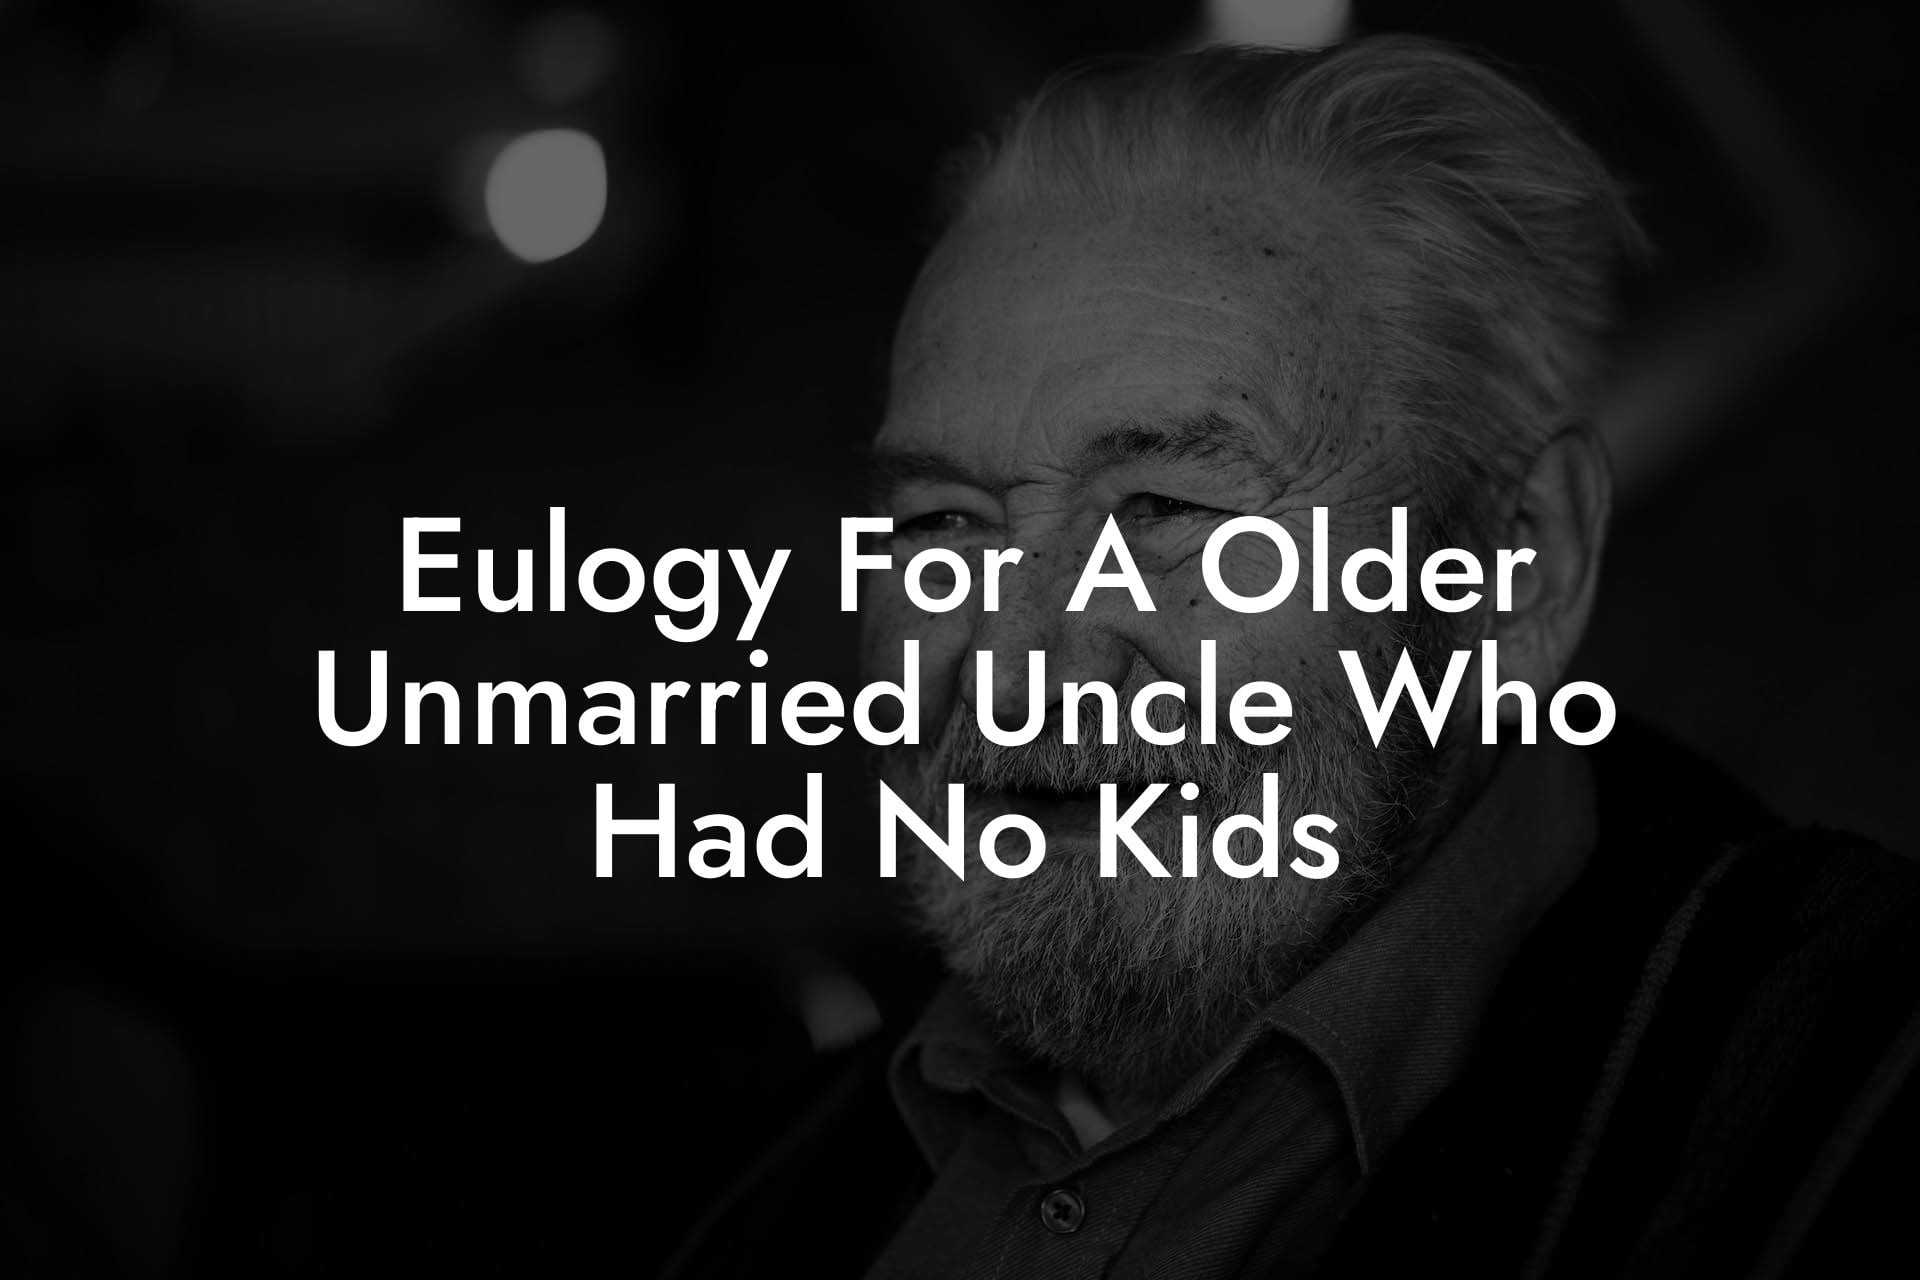 Eulogy For A Older Unmarried Uncle Who Had No Kids